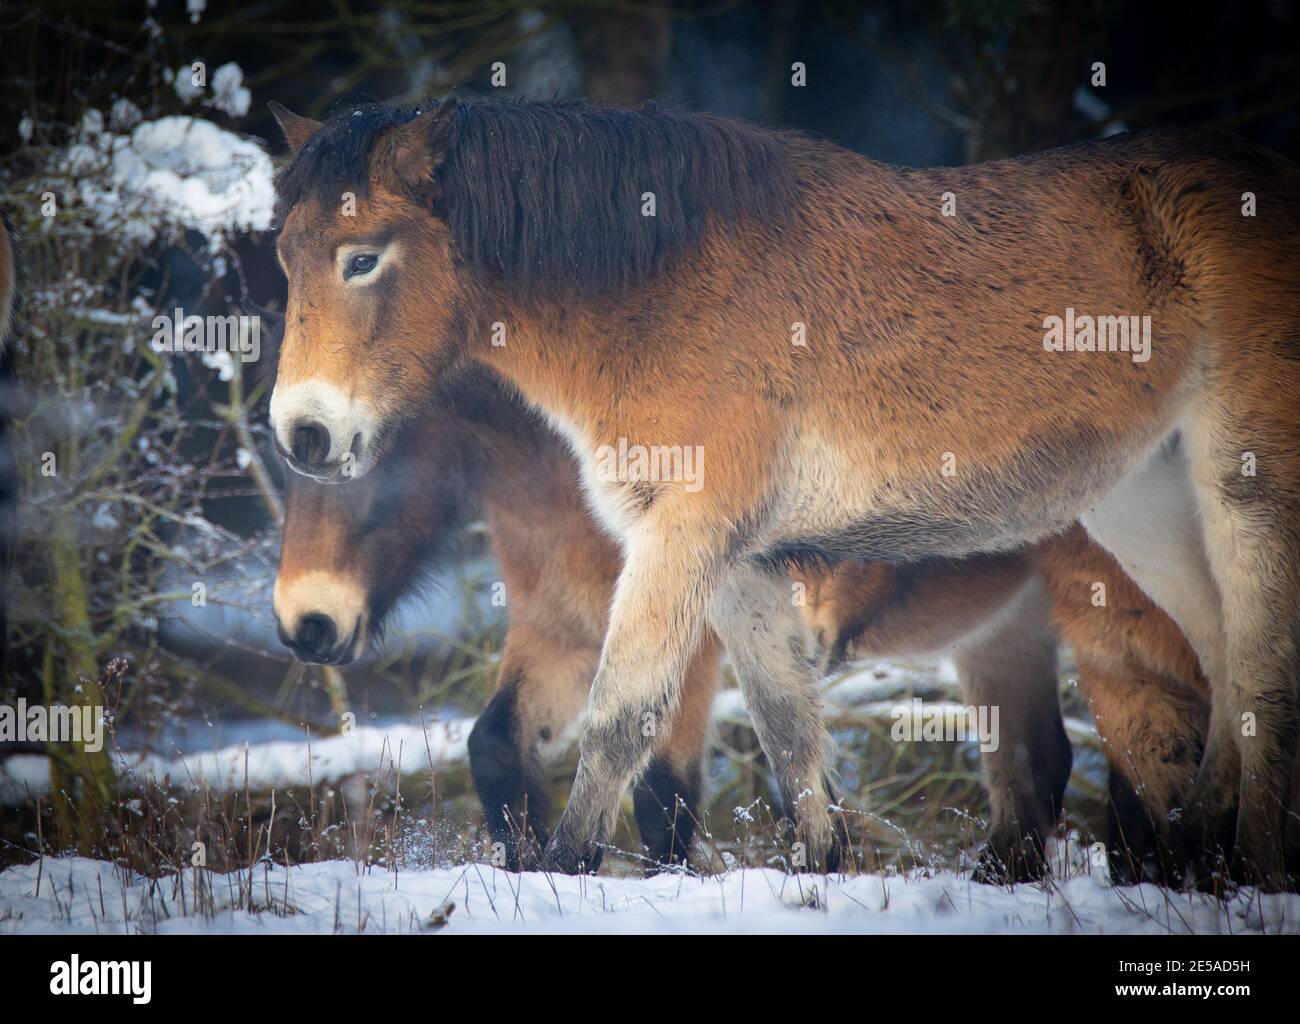 wild horse resting on a snow meadow, the best photo. Stock Photo